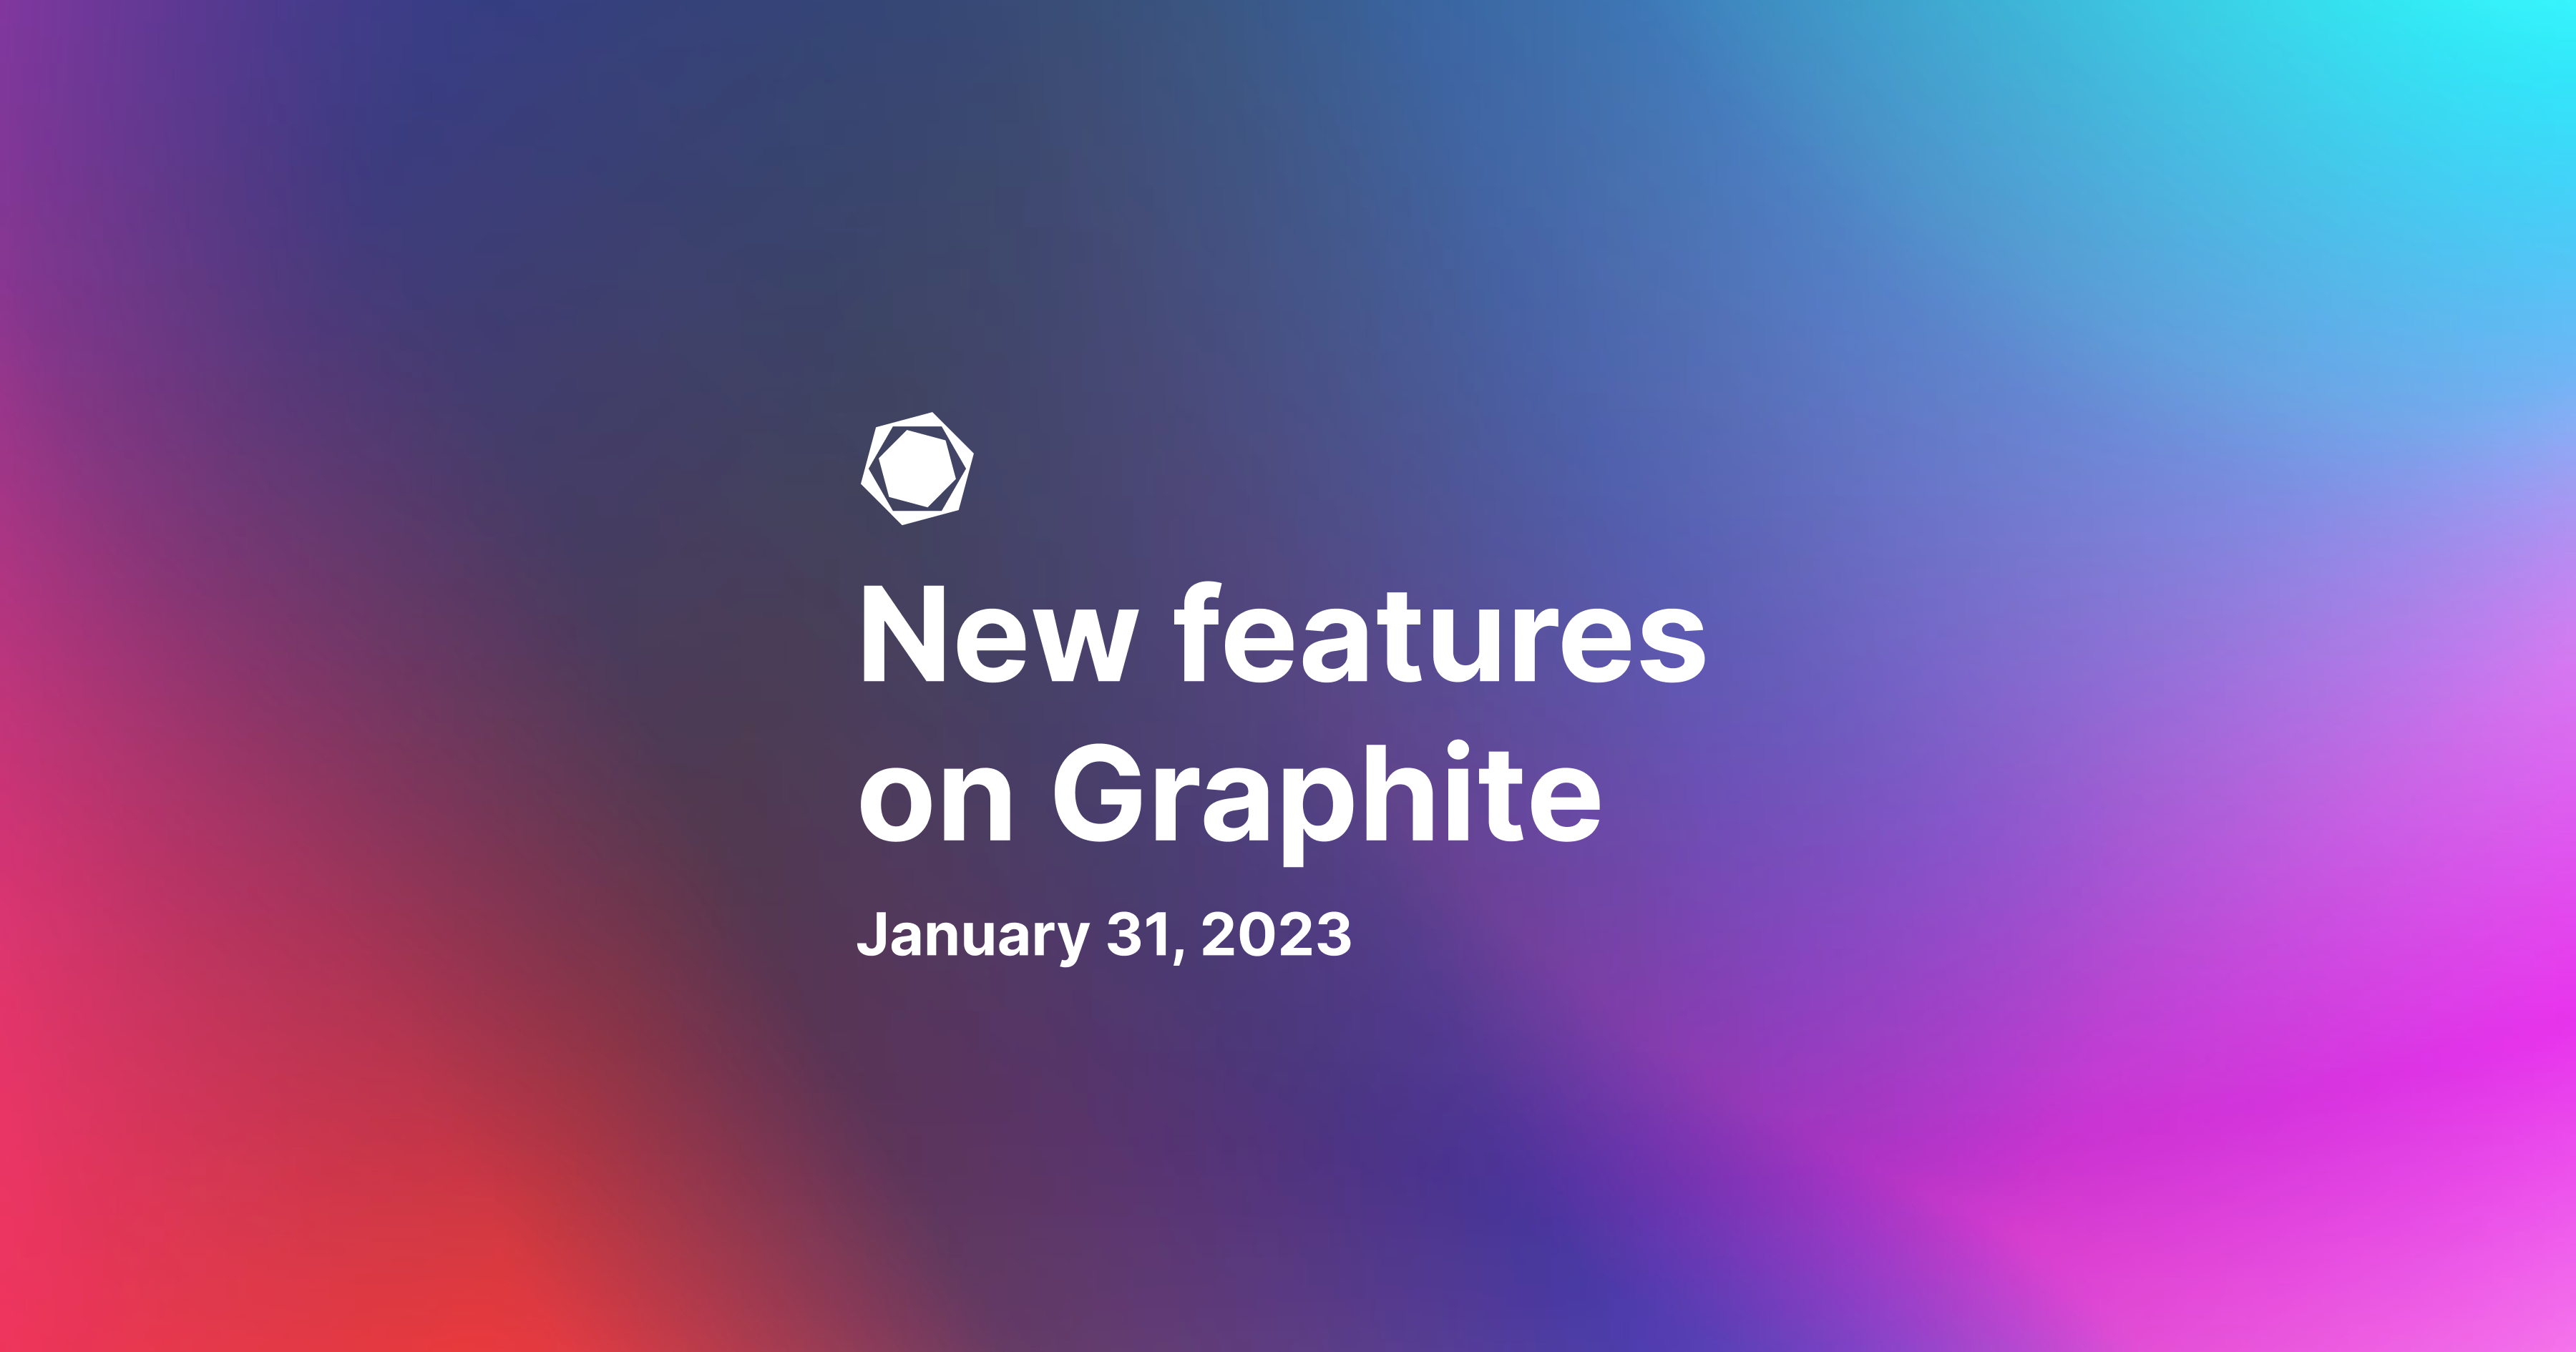 New feature updates on Graphite - January 31 2023